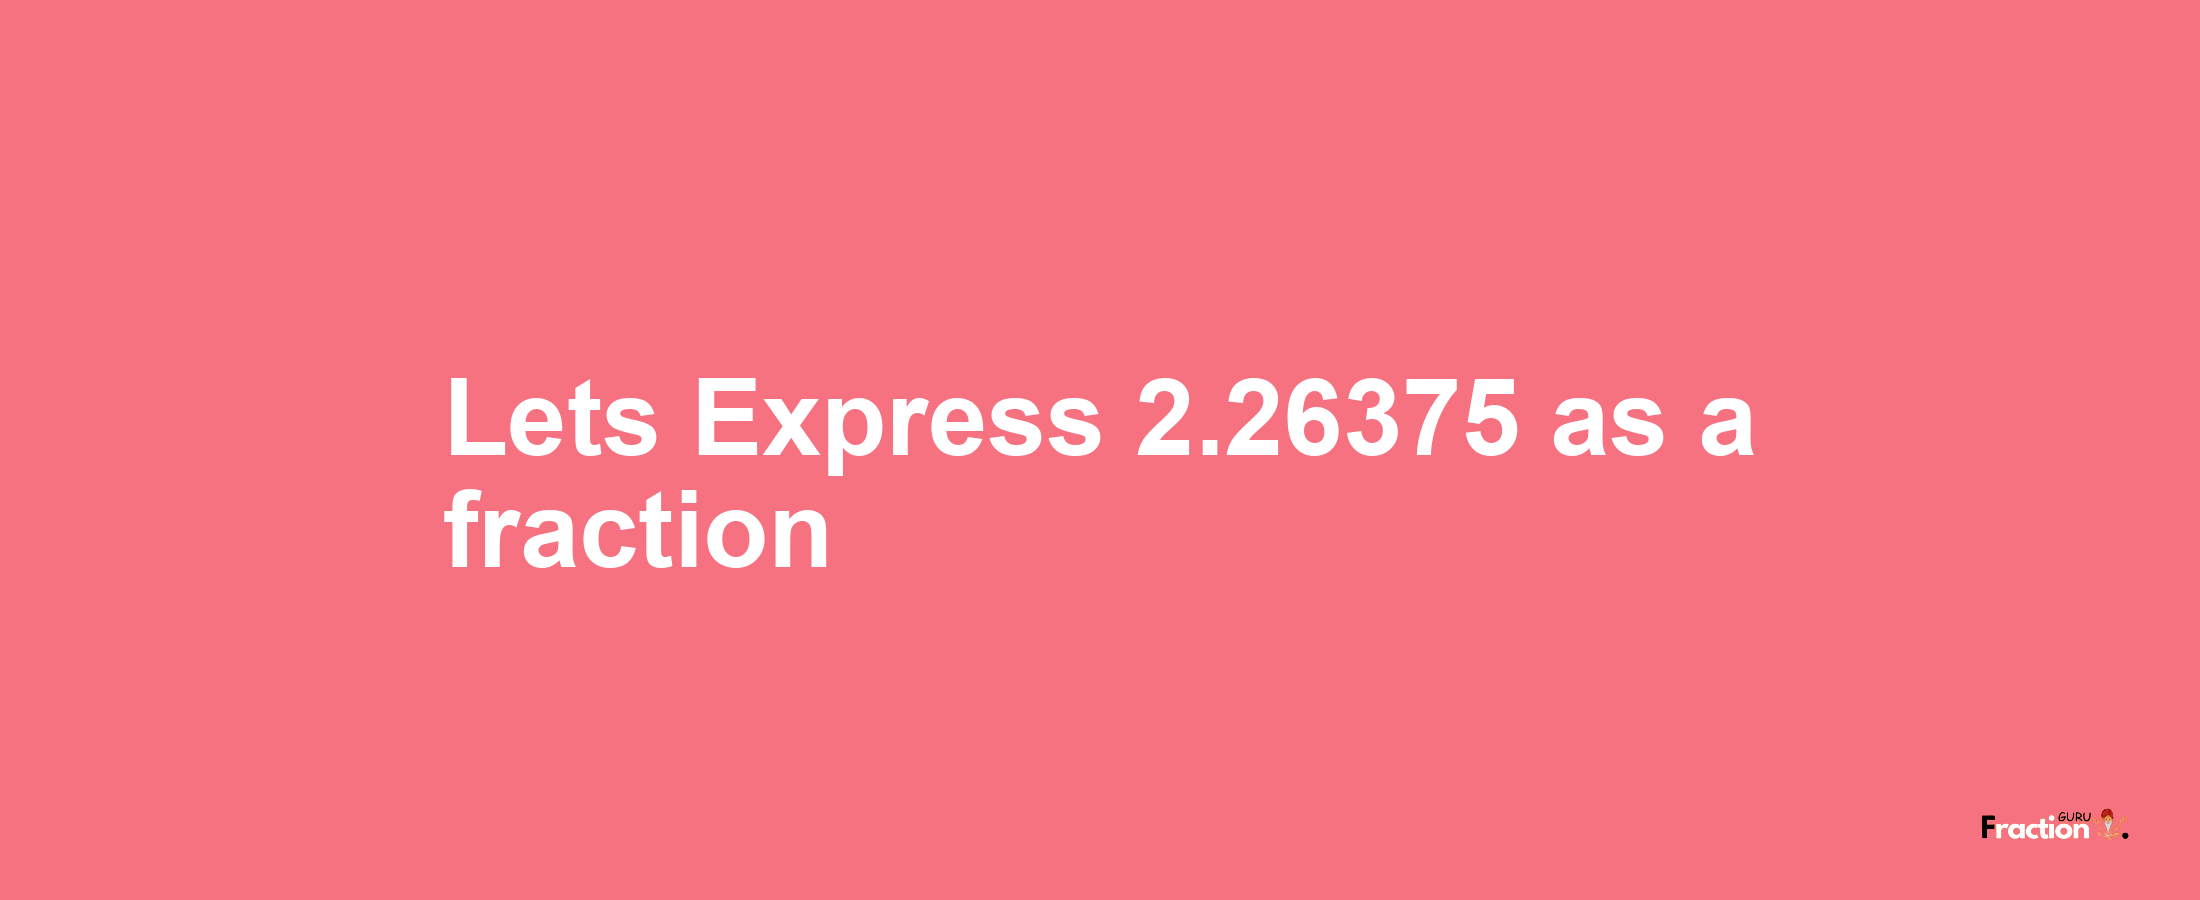 Lets Express 2.26375 as afraction